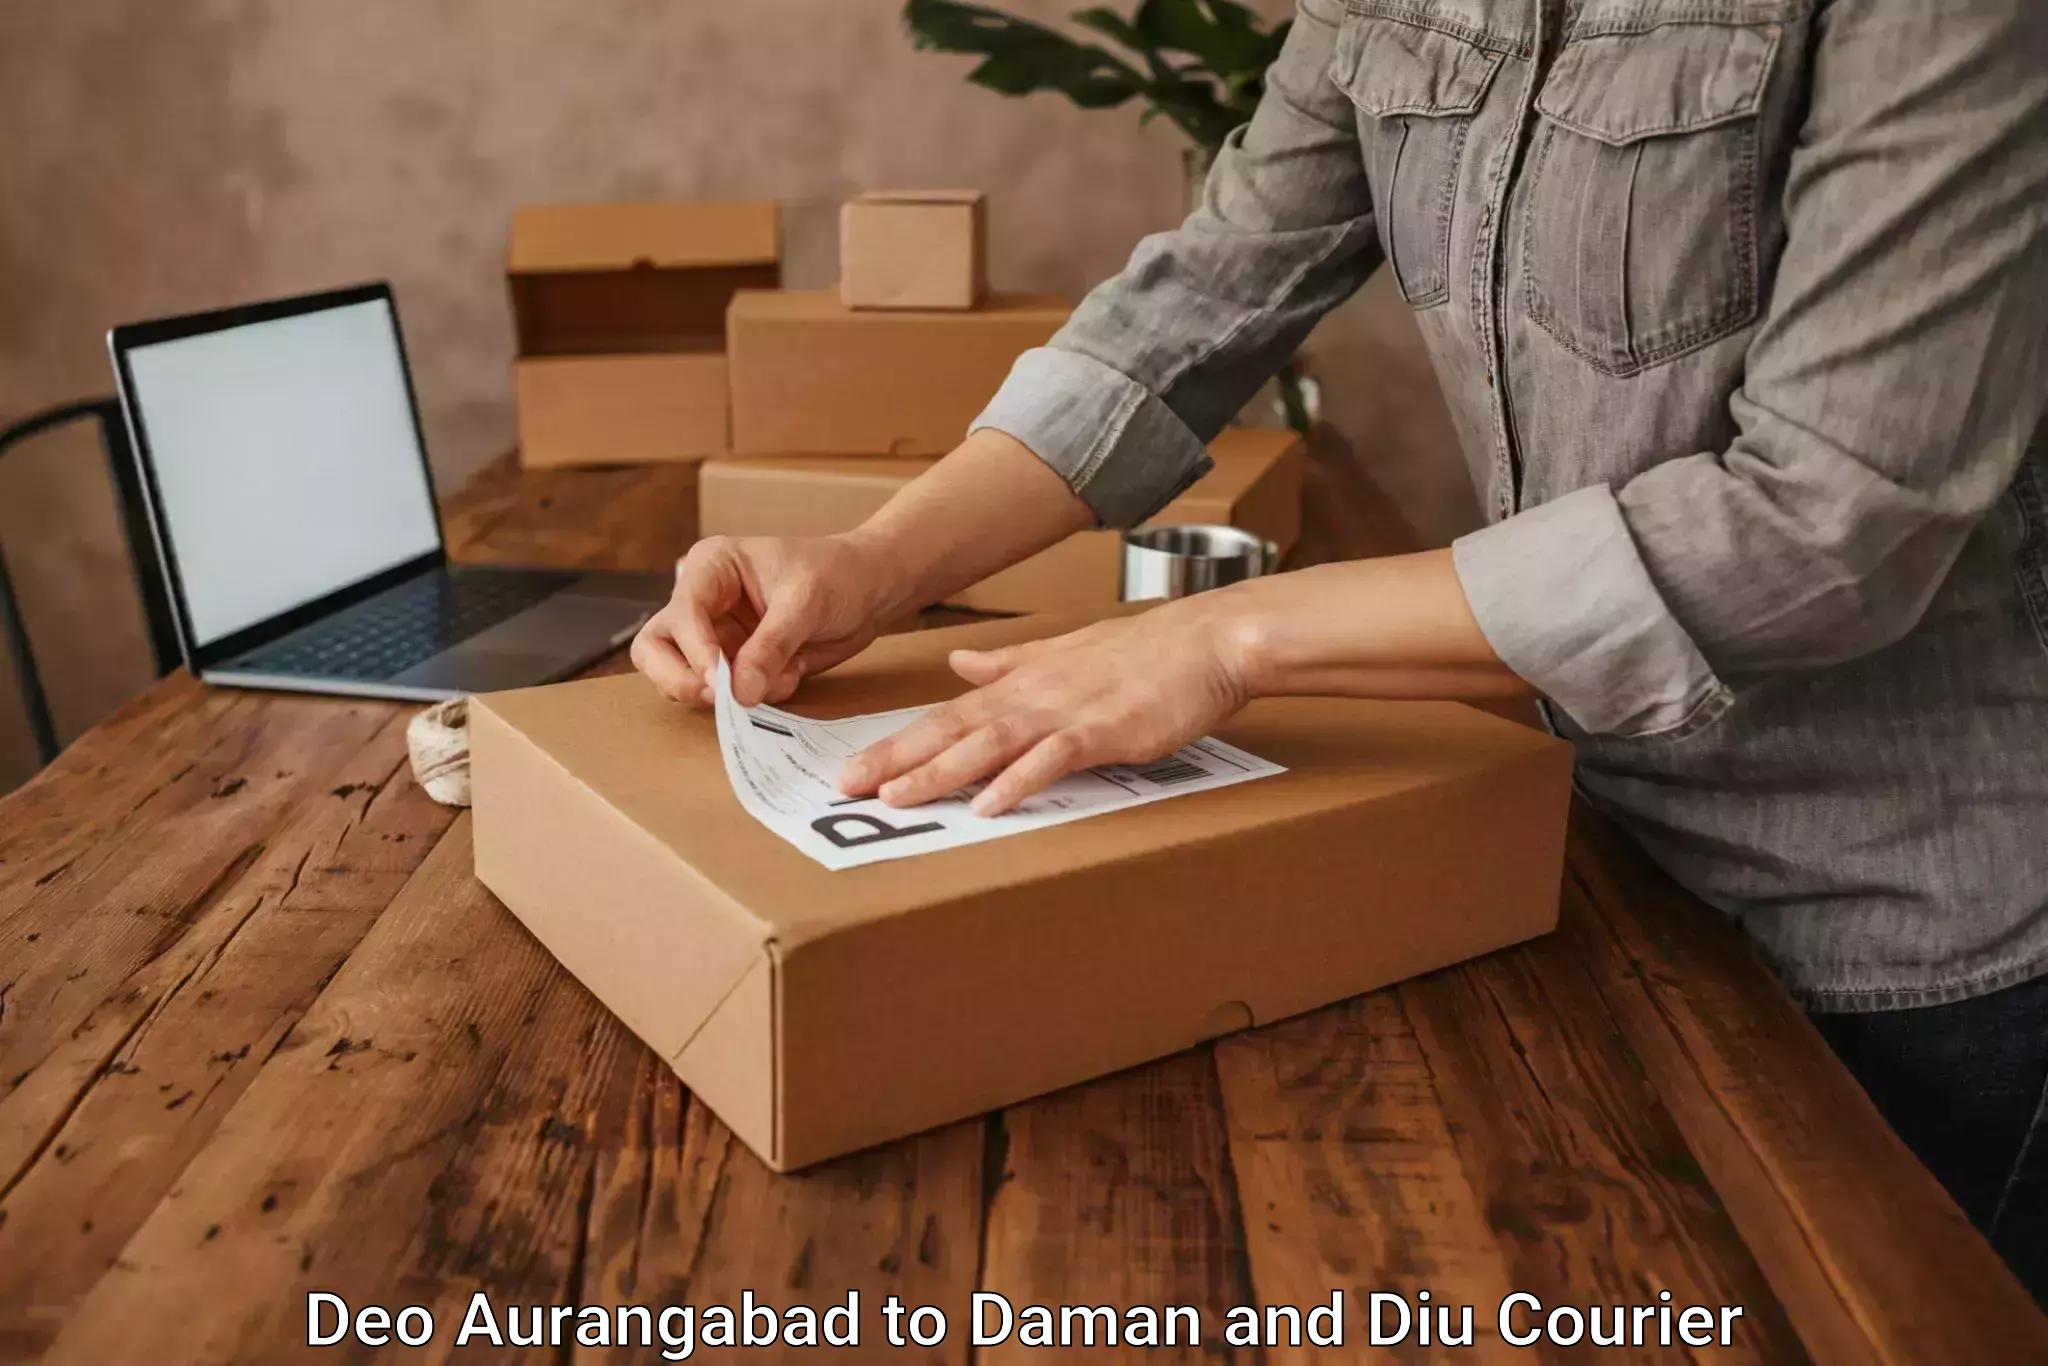 Budget-friendly moving services Deo Aurangabad to Daman